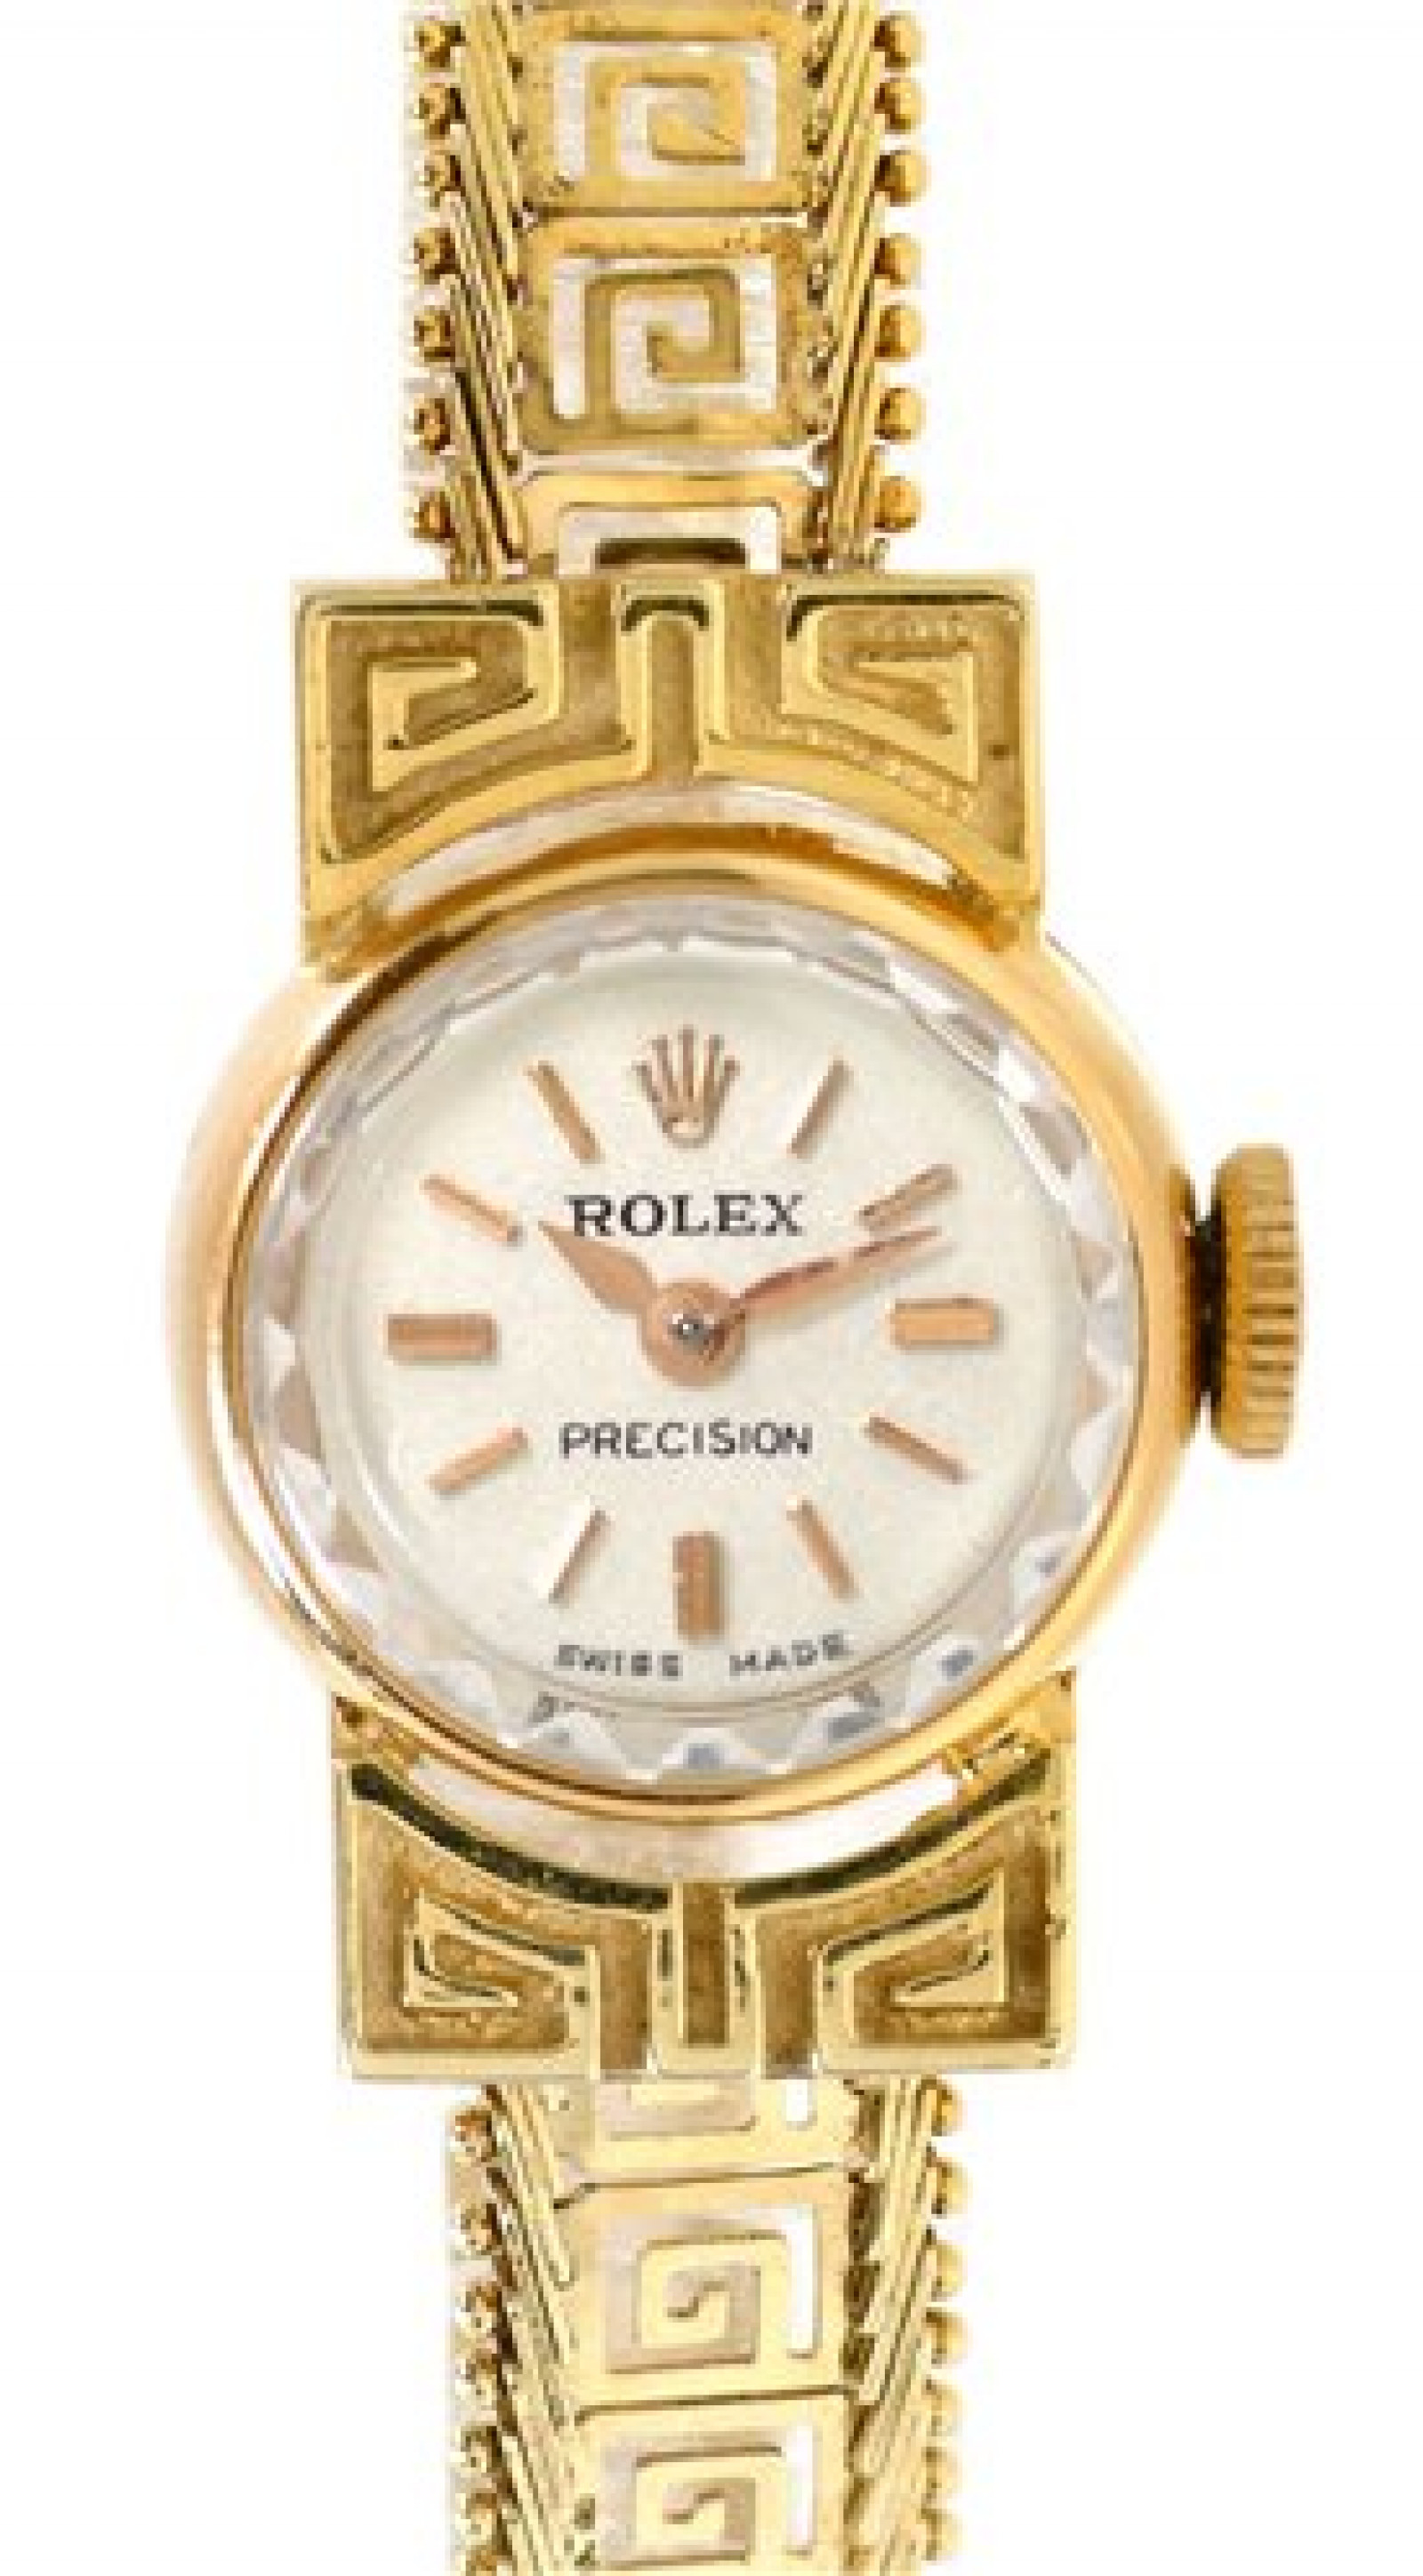 Vintage Rolex Precision 2113 Gold with Silver Dial